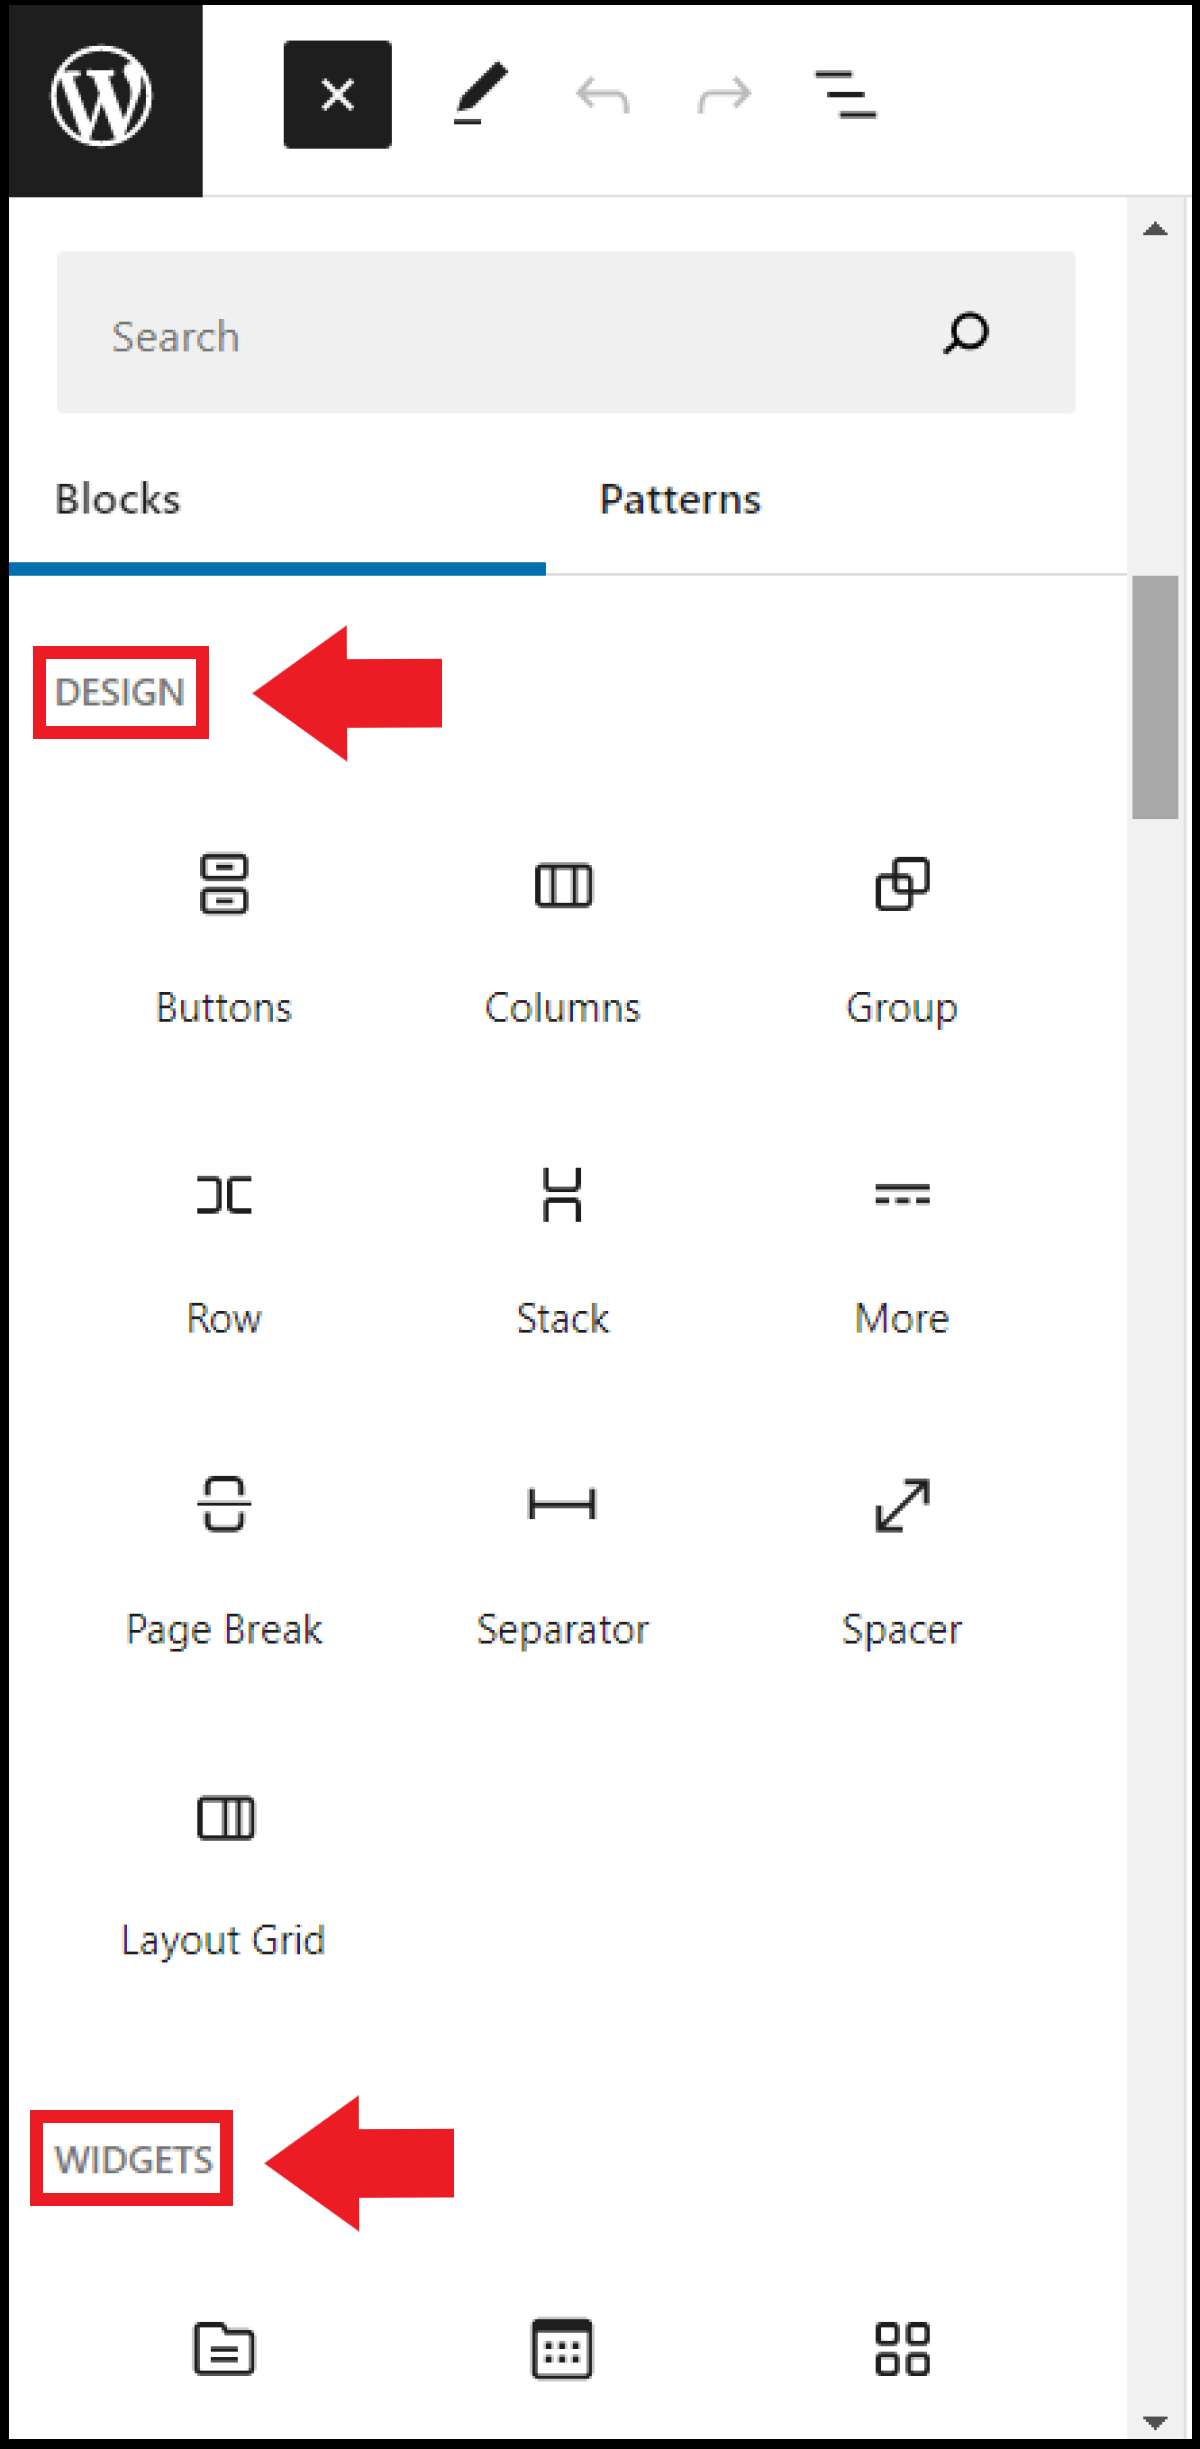 The “Design” and “Widgets” sections in the editor menu